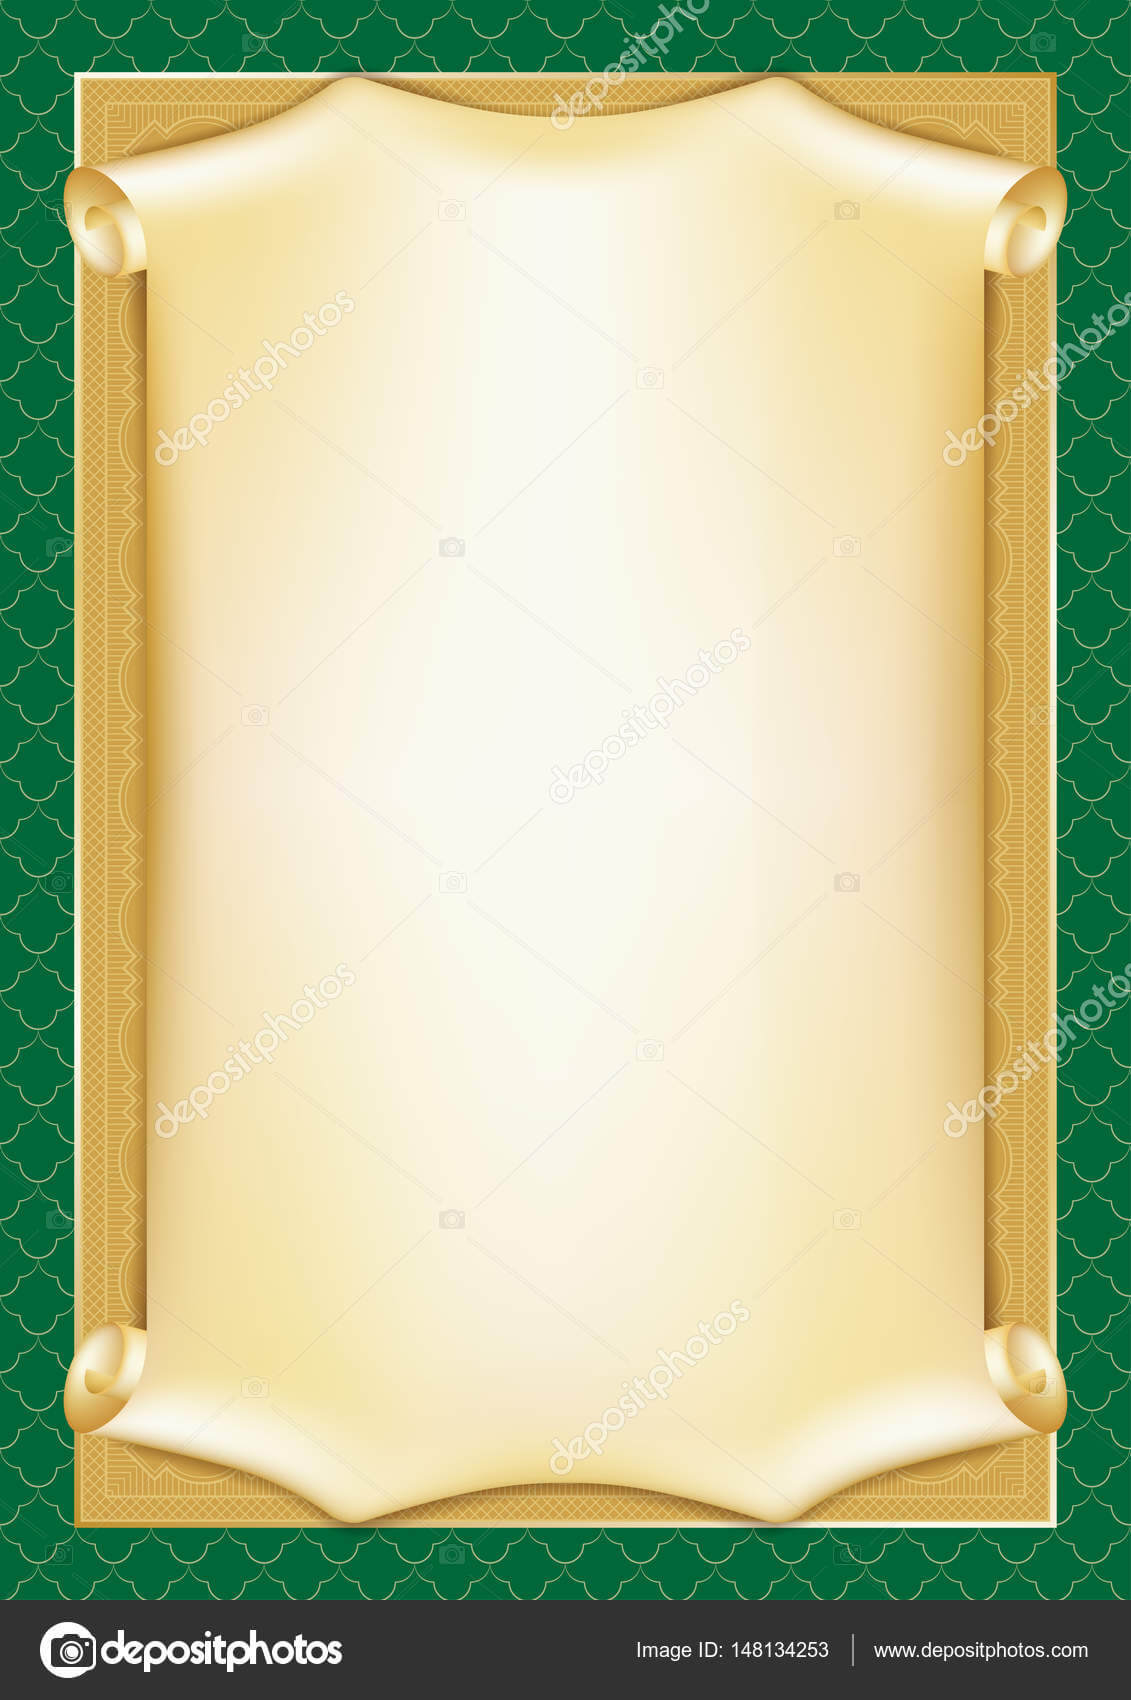 Template For Diploma, Certificate, Card With Scroll And Intended For Certificate Scroll Template